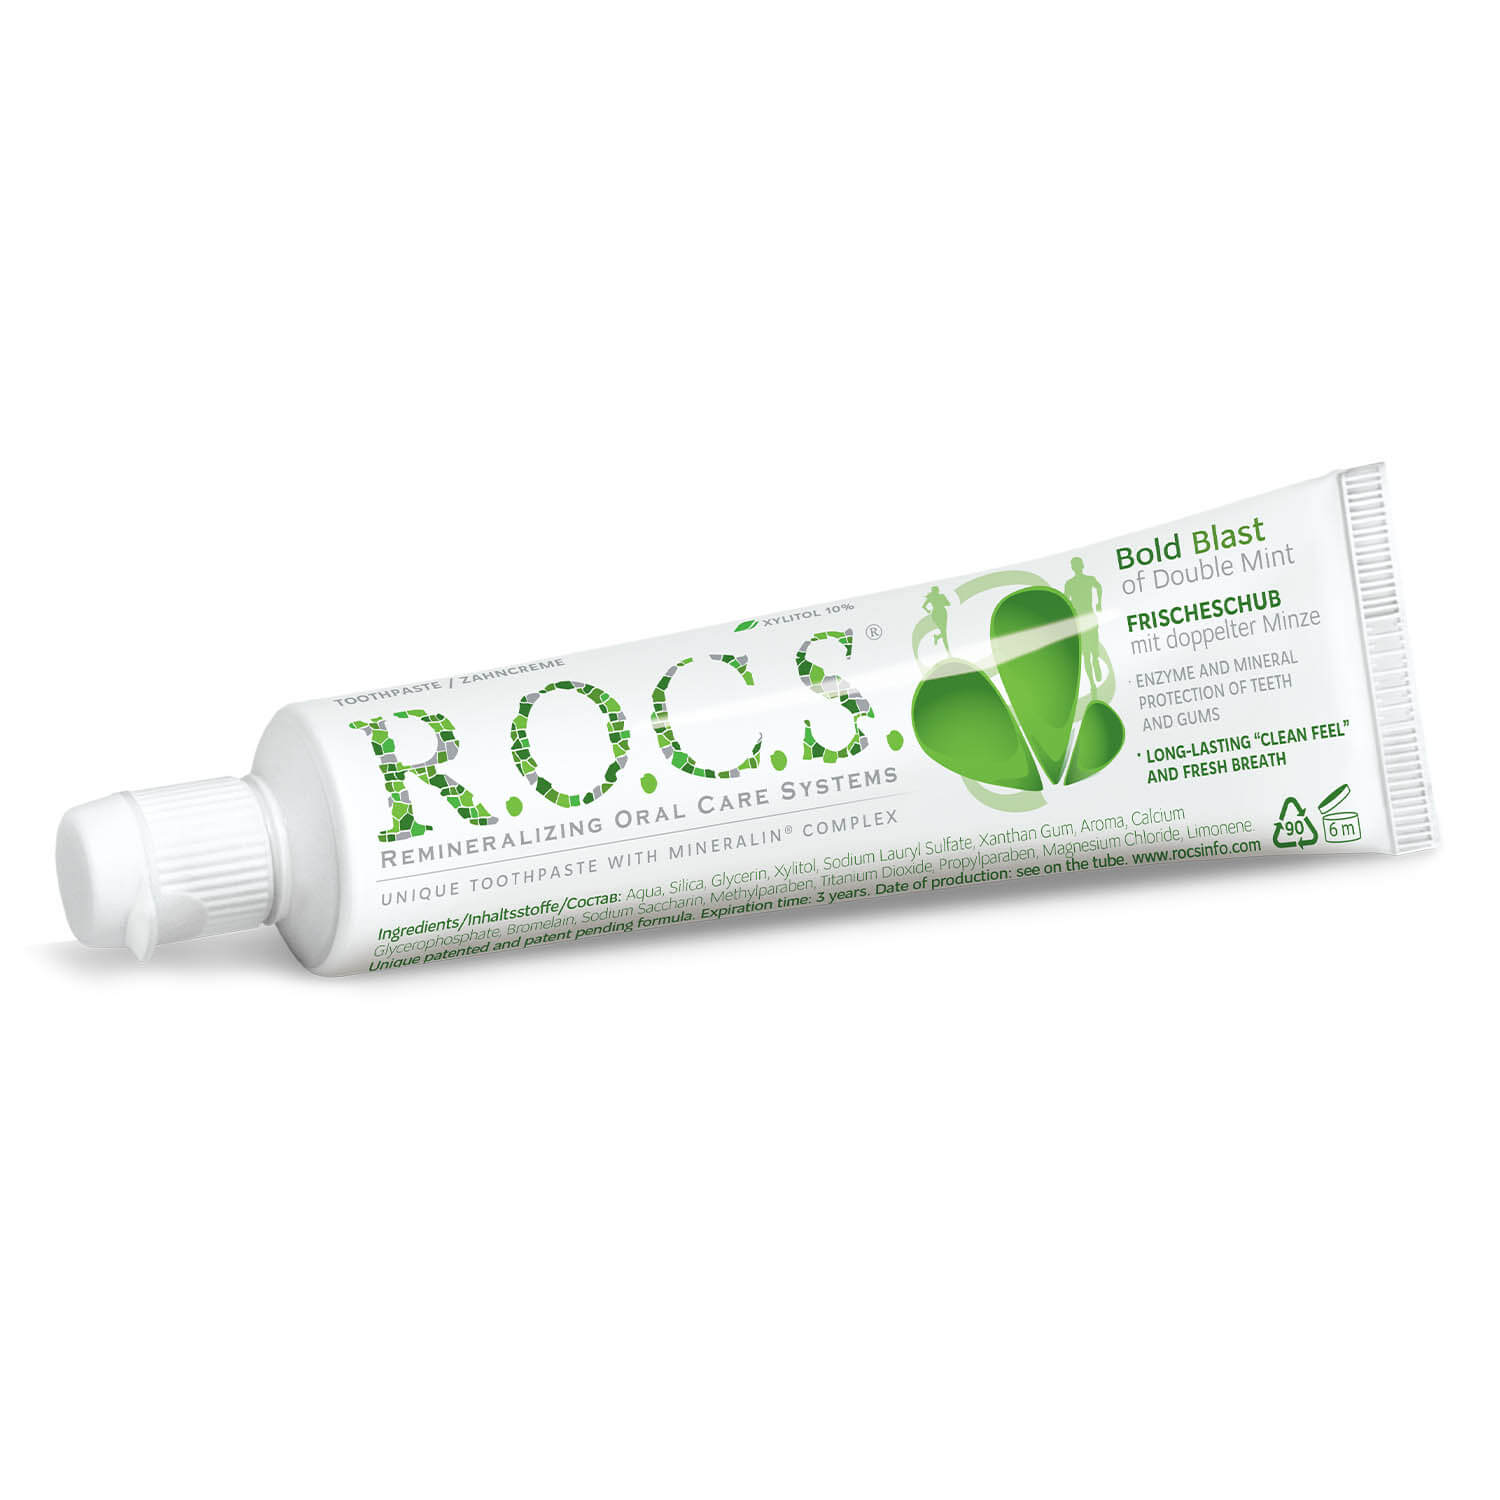 Toothpaste R.O.C.S.® Bold Blast of Double Mint - R.O.C.S.